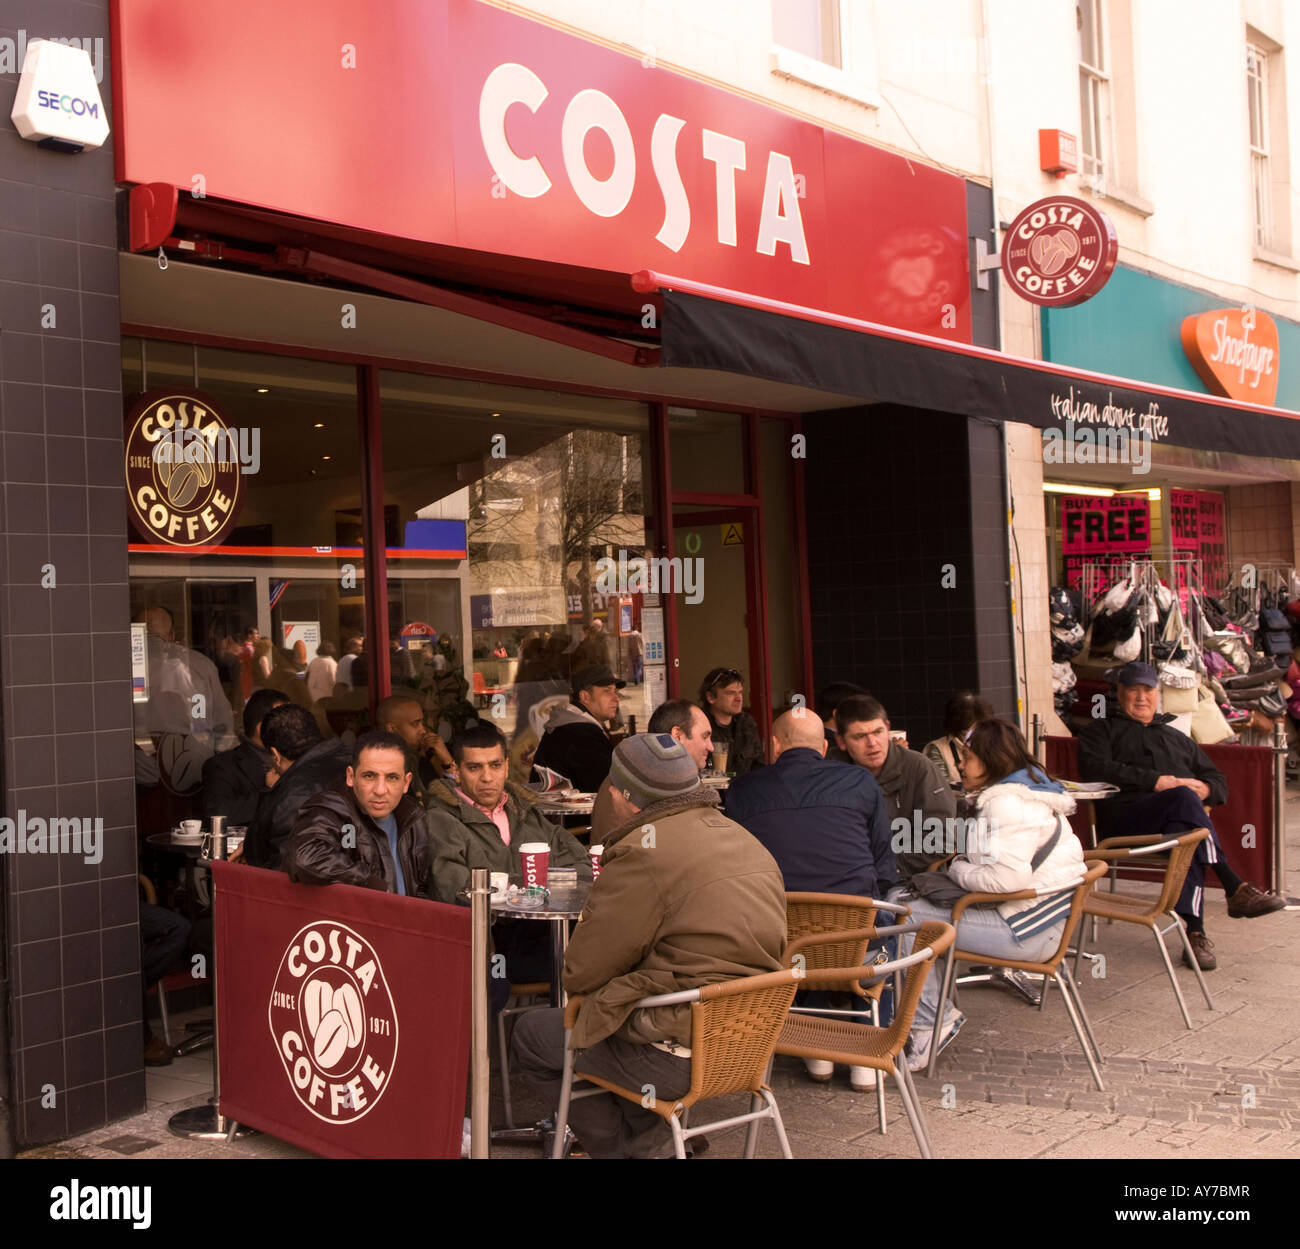 Costa Coffee, High Street, Hounslow, Middlesex, Royaume-Uni. Banque D'Images